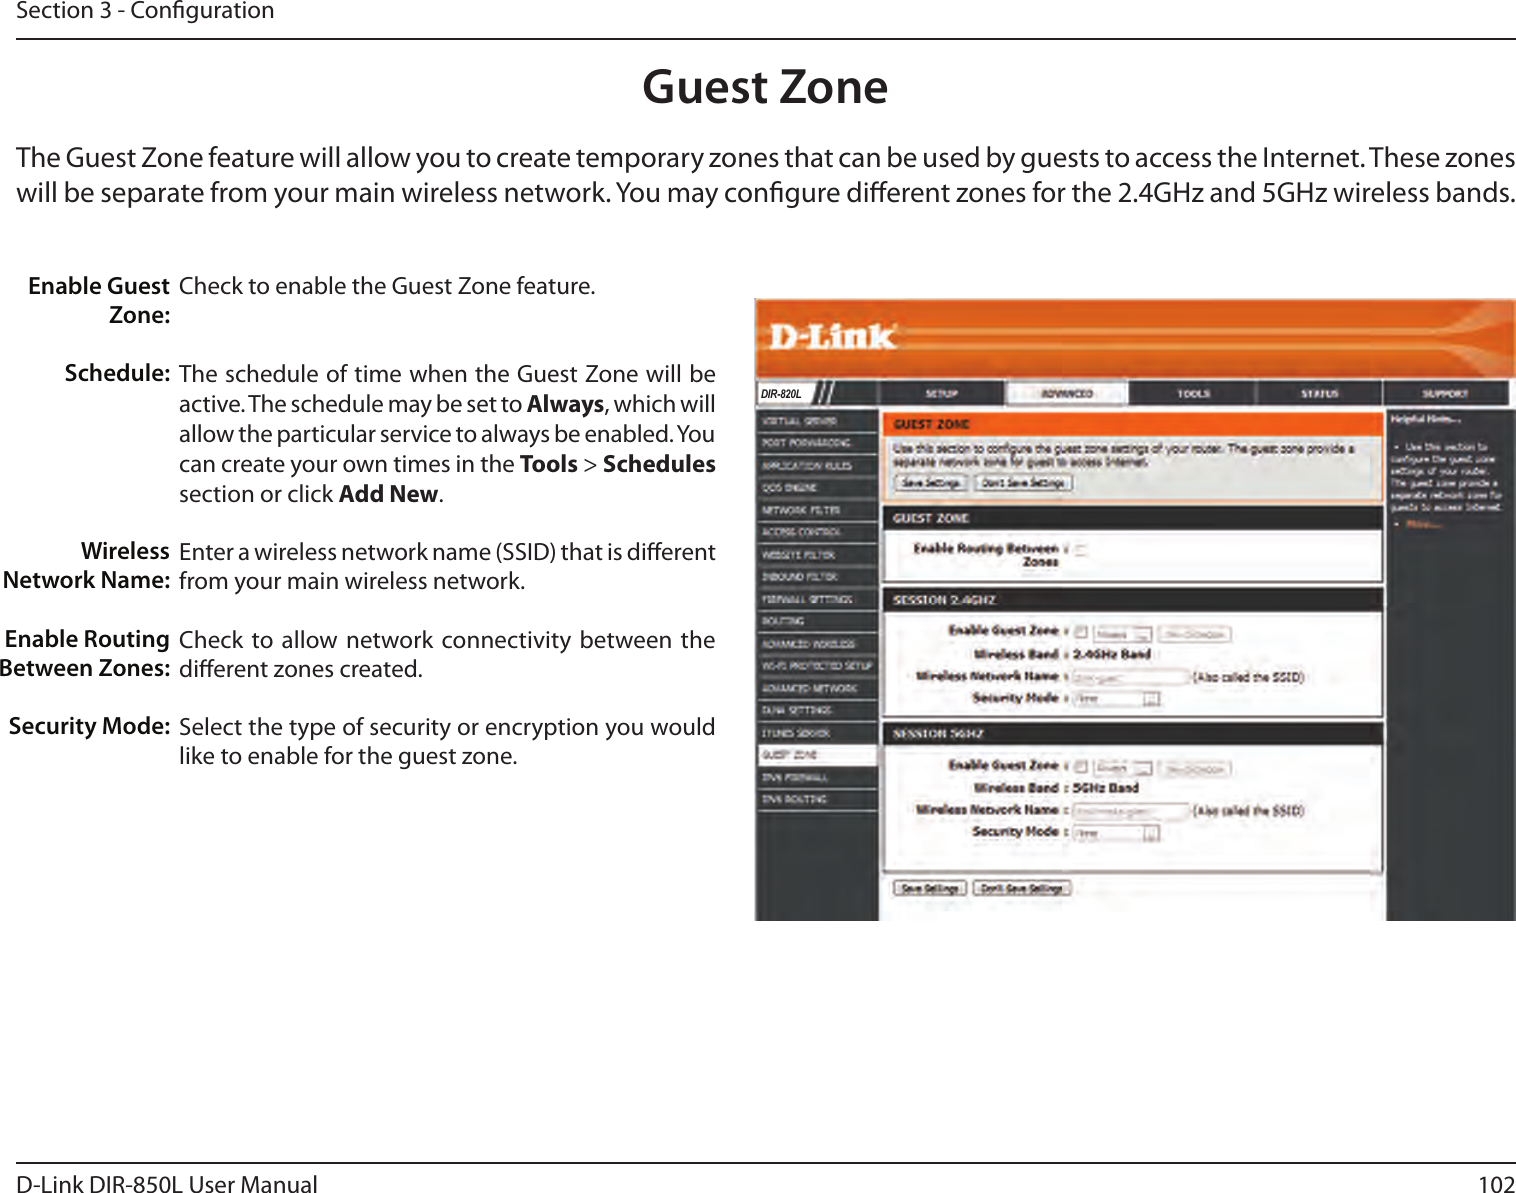 102D-Link DIR-850L User ManualSection 3 - CongurationGuest ZoneCheck to enable the Guest Zone feature. The schedule of time when the Guest Zone will be active. The schedule may be set to Always, which will allow the particular service to always be enabled. You can create your own times in the Tools &gt; Schedules section or click Add New.Enter a wireless network name (SSID) that is dierent from your main wireless network.Check to allow network connectivity  between the dierent zones created. Select the type of security or encryption you would like to enable for the guest zone.  Enable Guest Zone:Schedule:Wireless Network Name:Enable Routing Between Zones:Security Mode:The Guest Zone feature will allow you to create temporary zones that can be used by guests to access the Internet. These zones will be separate from your main wireless network. You may congure dierent zones for the 2.4GHz and 5GHz wireless bands.DIR-820L